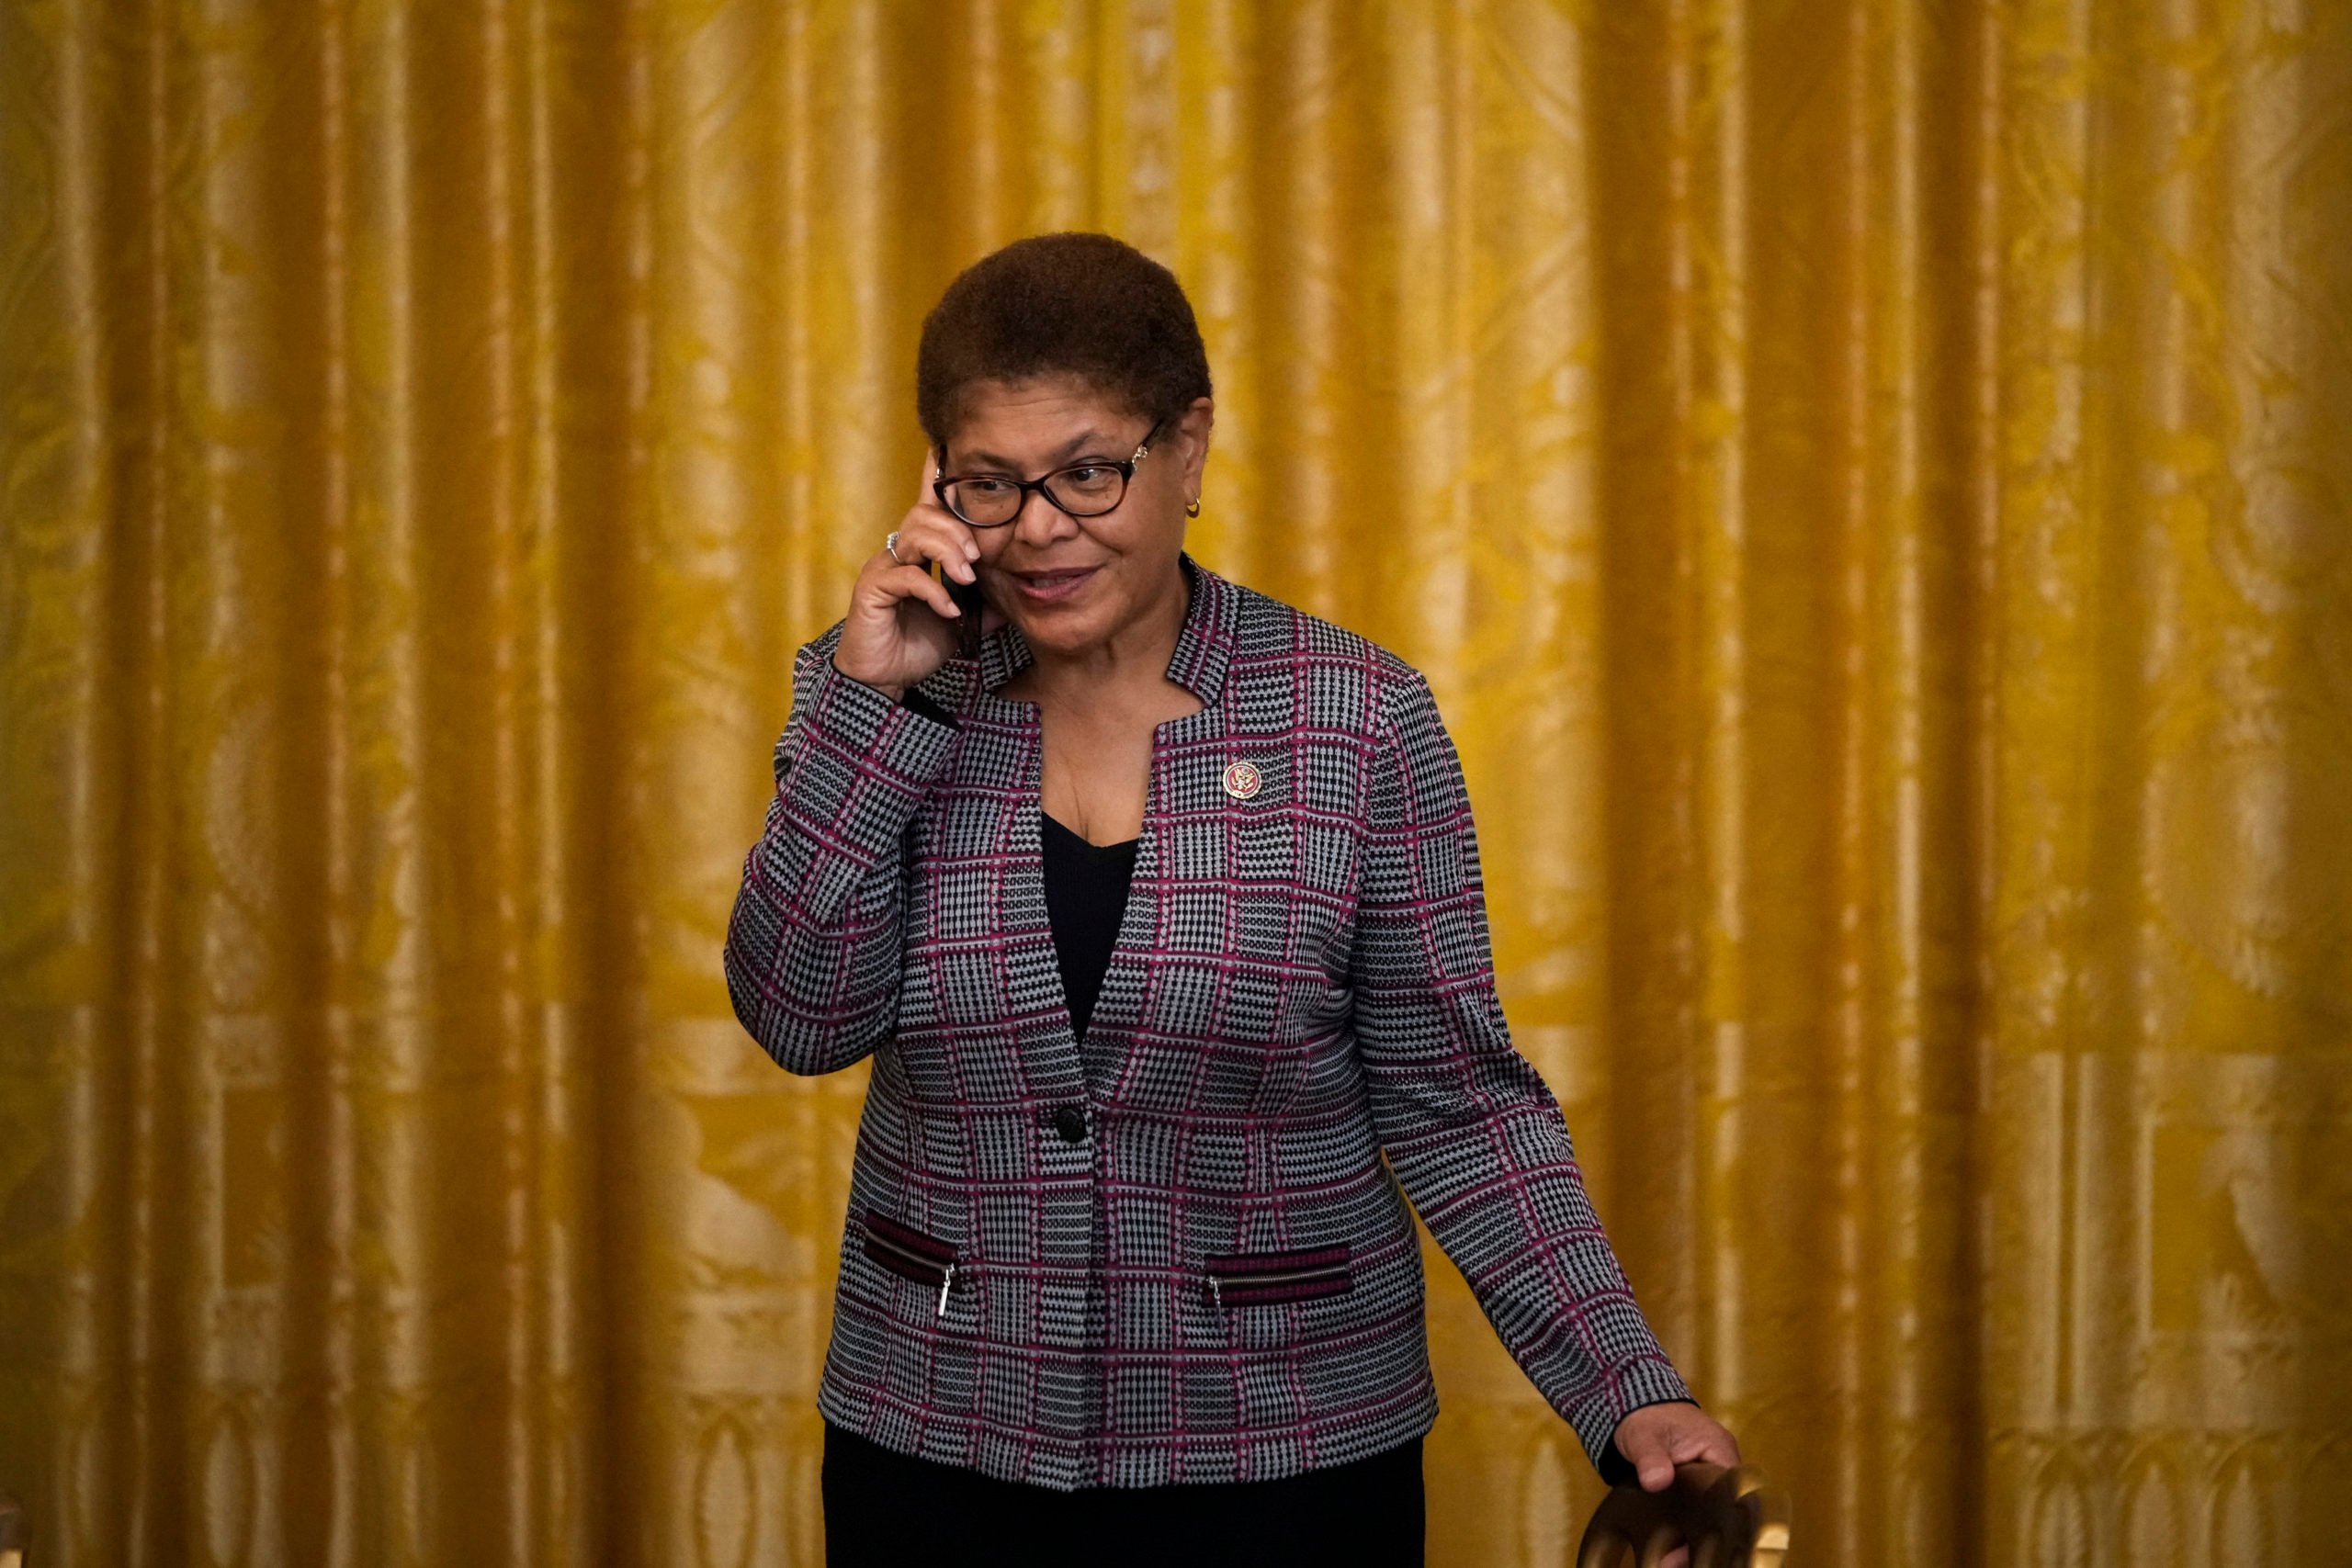 Rep. Karen Bass (D-CA) speaks on the phone before U.S. President Joe Biden signs the Juneteenth National Independence Day Act into law in the East Room of the White House on June 17, 2021 in Washington, DC. (Photo by Drew Angerer/Getty Images)